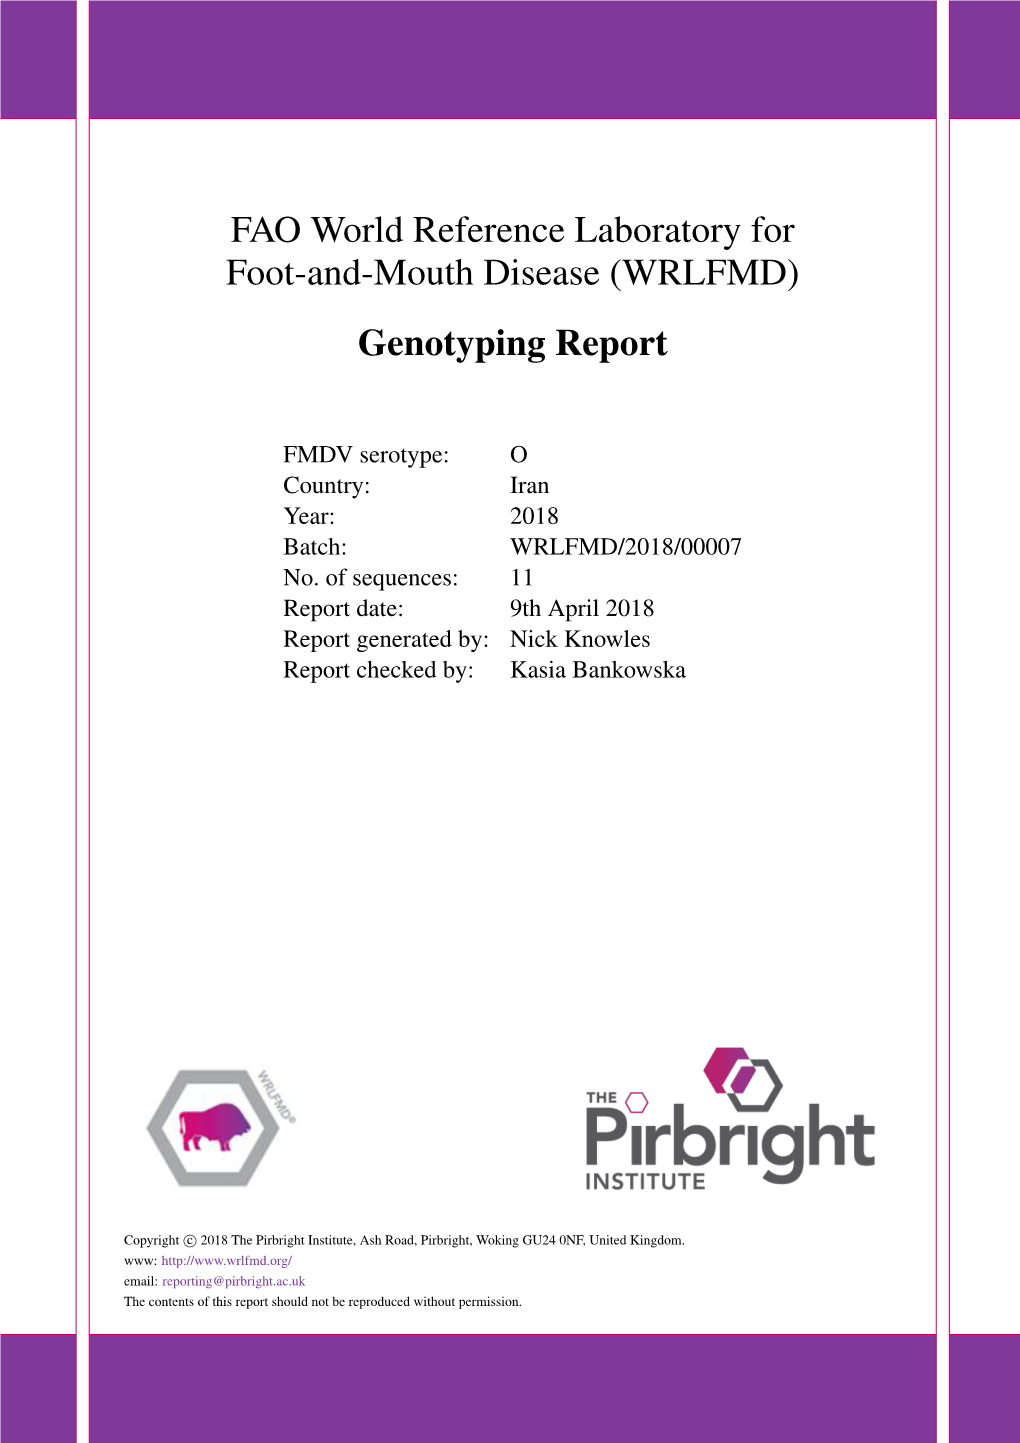 FAO World Reference Laboratory for Foot-And-Mouth Disease (WRLFMD) Genotyping Report